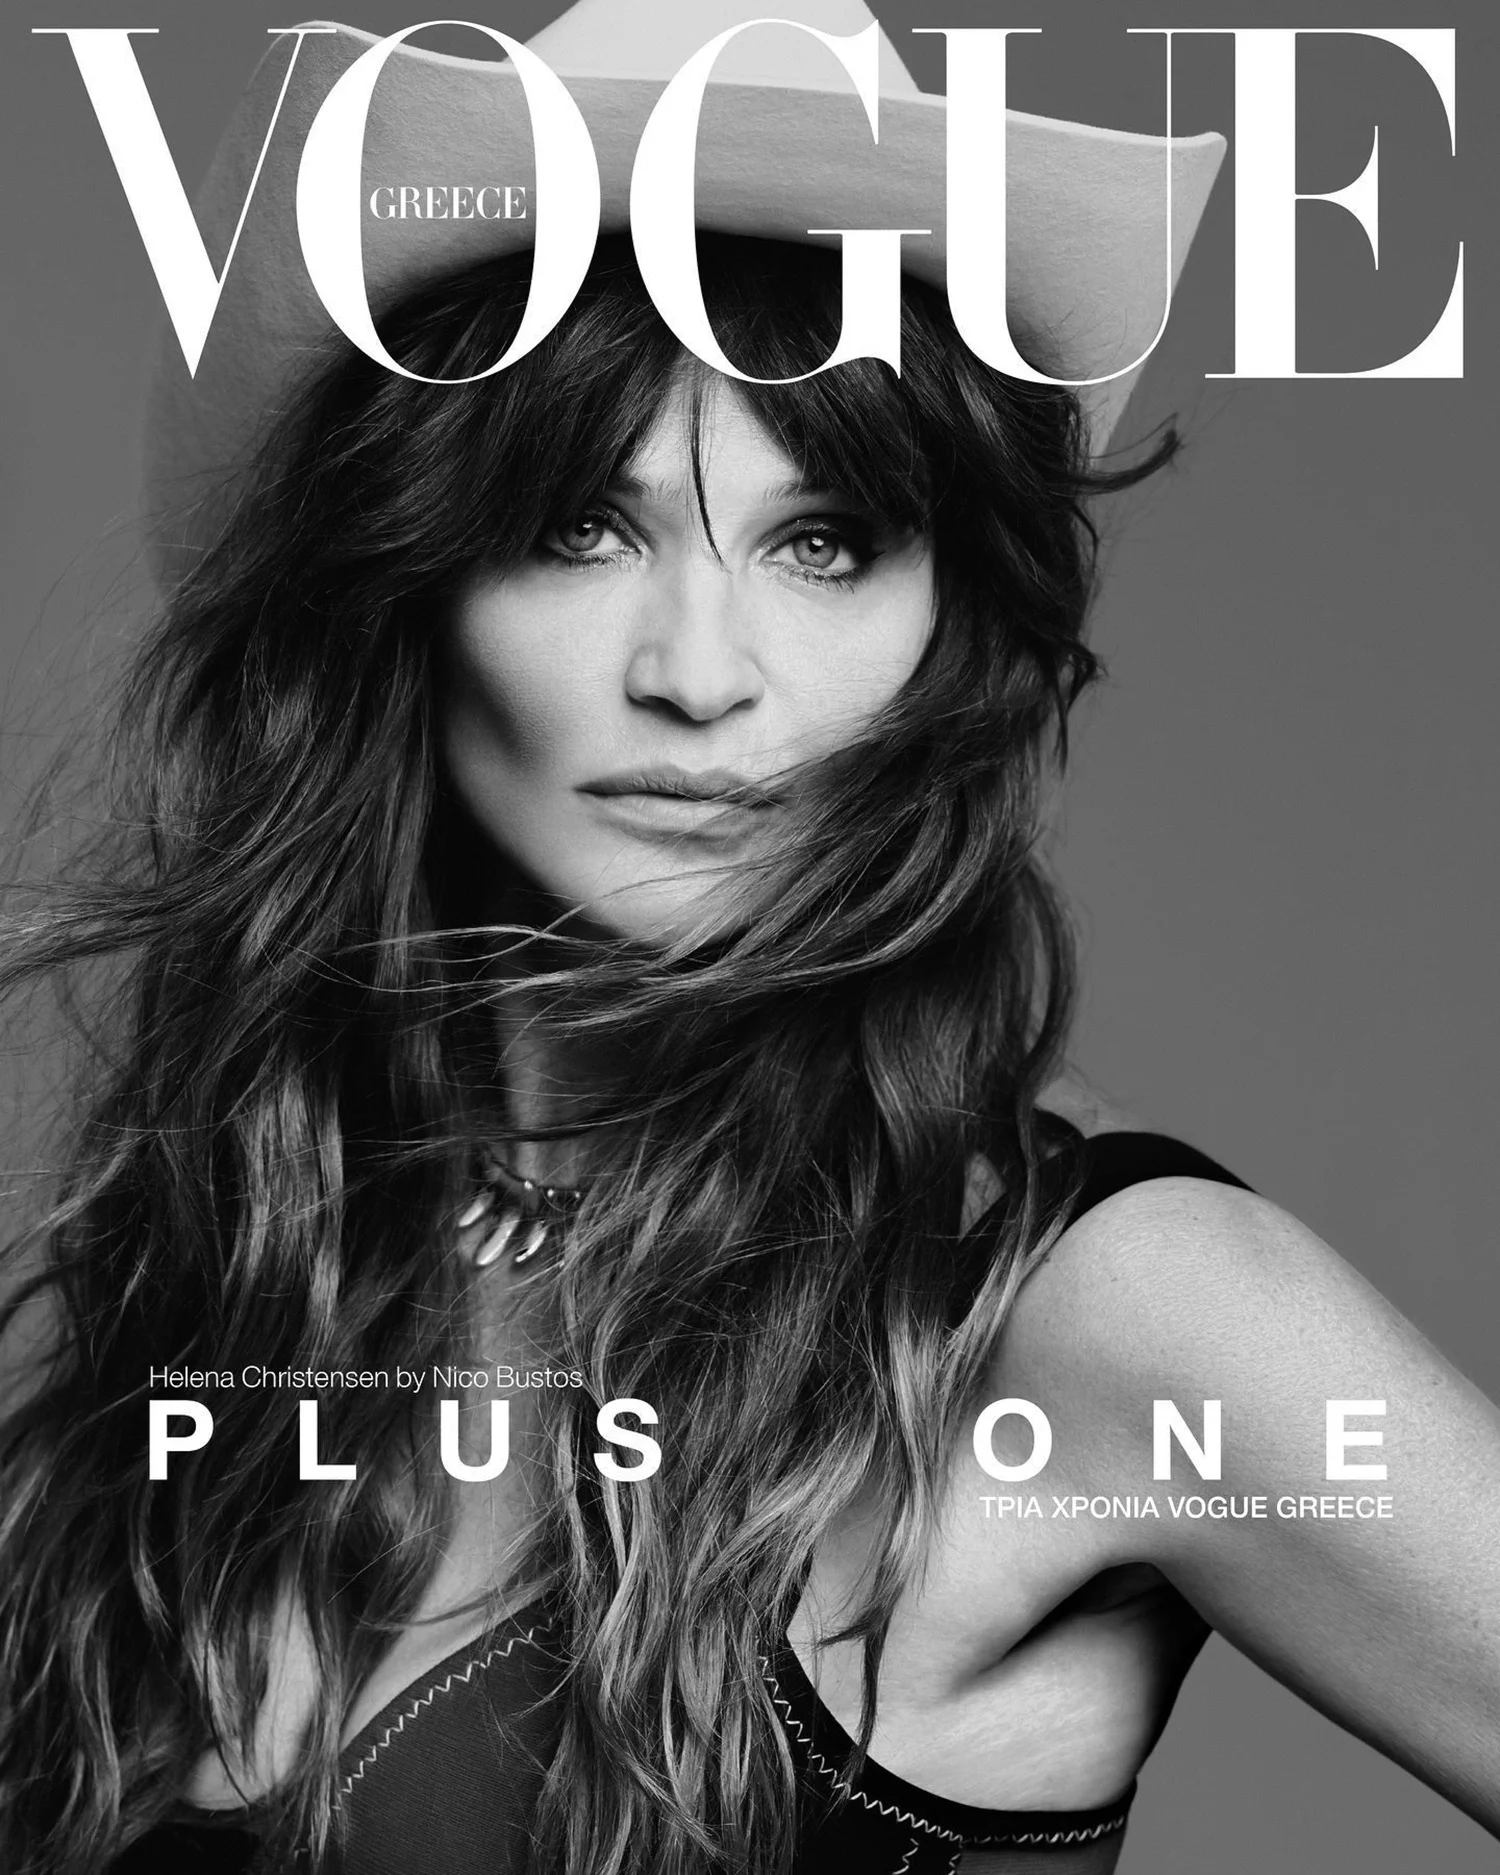 Carla Bruni and Helena Christensen cover Vogue Greece April 2022 by Nico Bustos